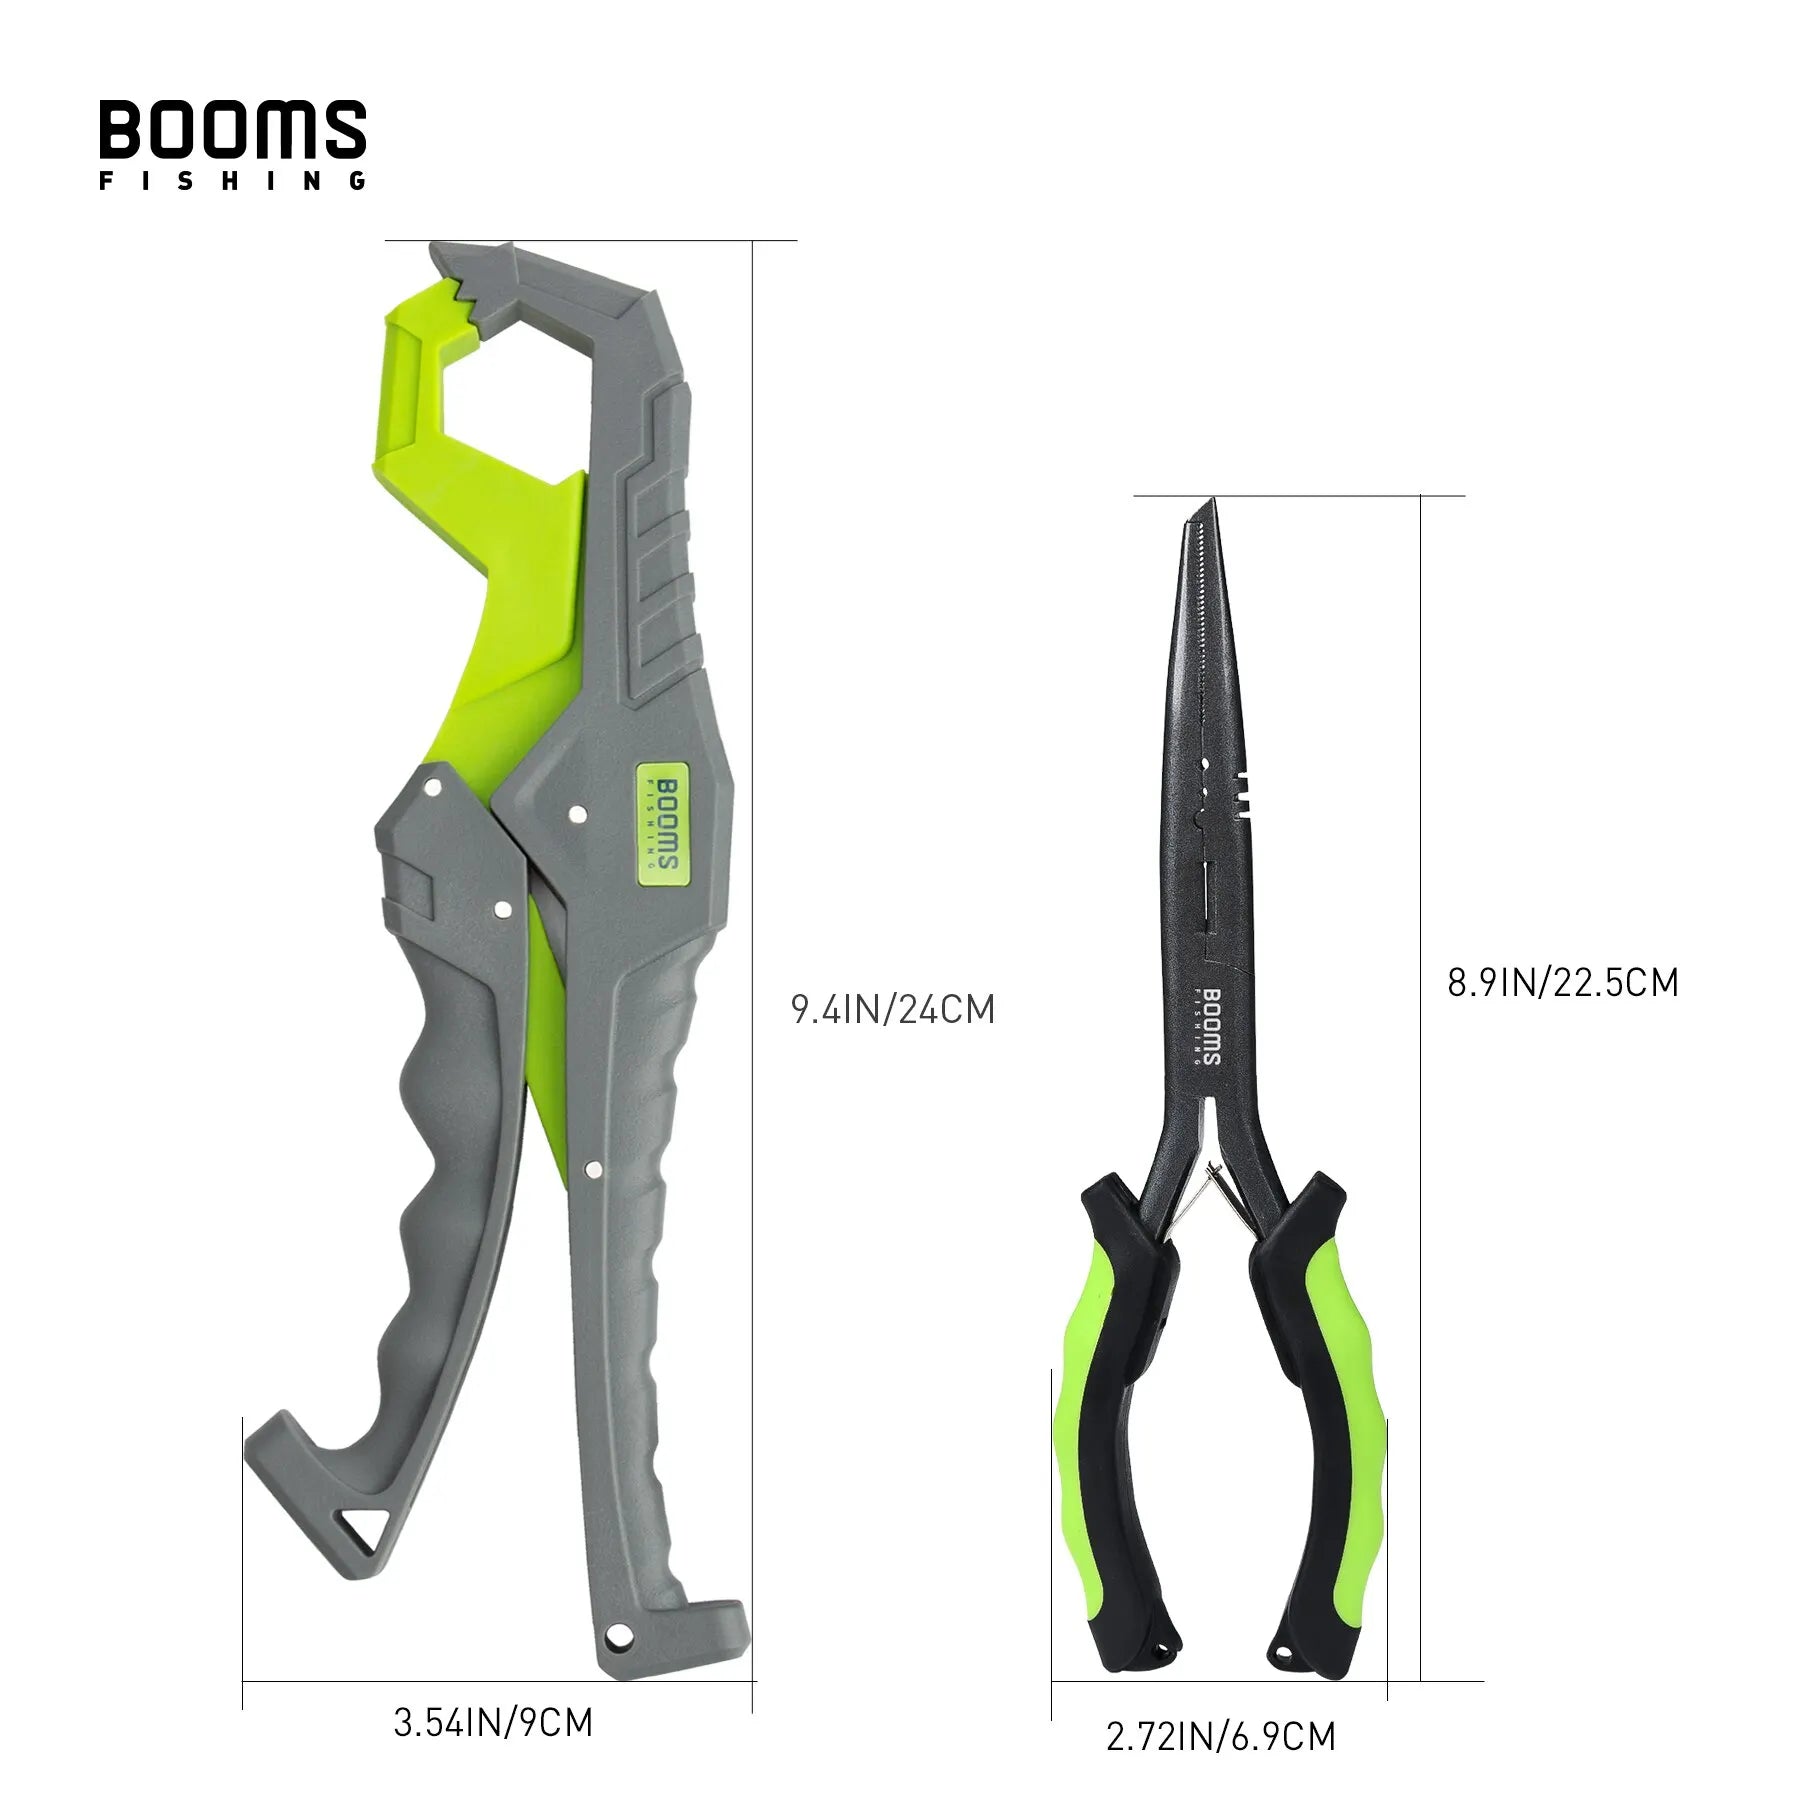  Booms Fishing H01 Fishing Pliers Scissors and R05